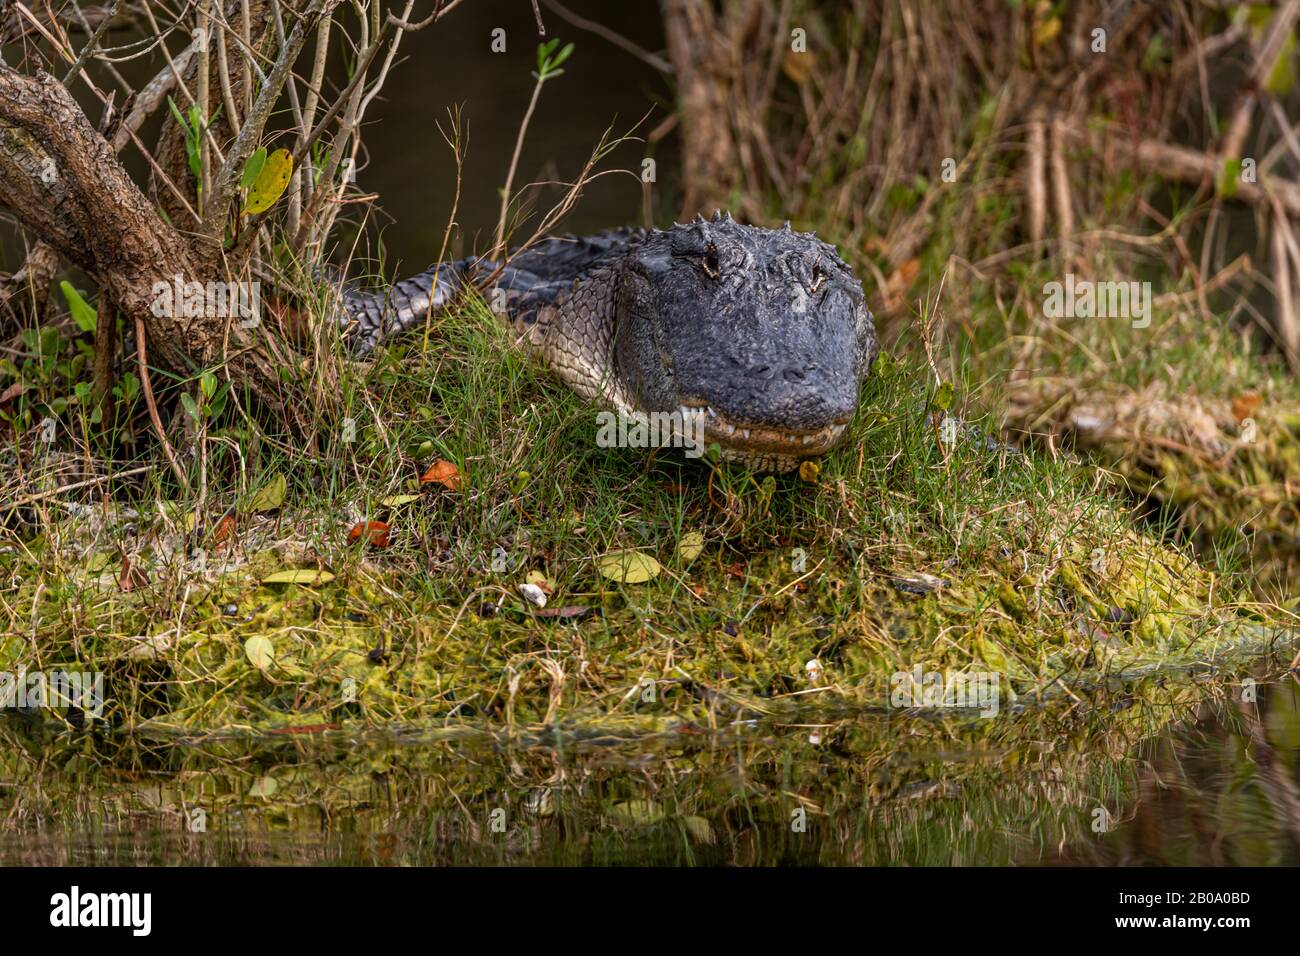 Close up portrait of an adult American Alligator (Alligator mississippiensis) lying in the grass in Florida, USA. Stock Photo